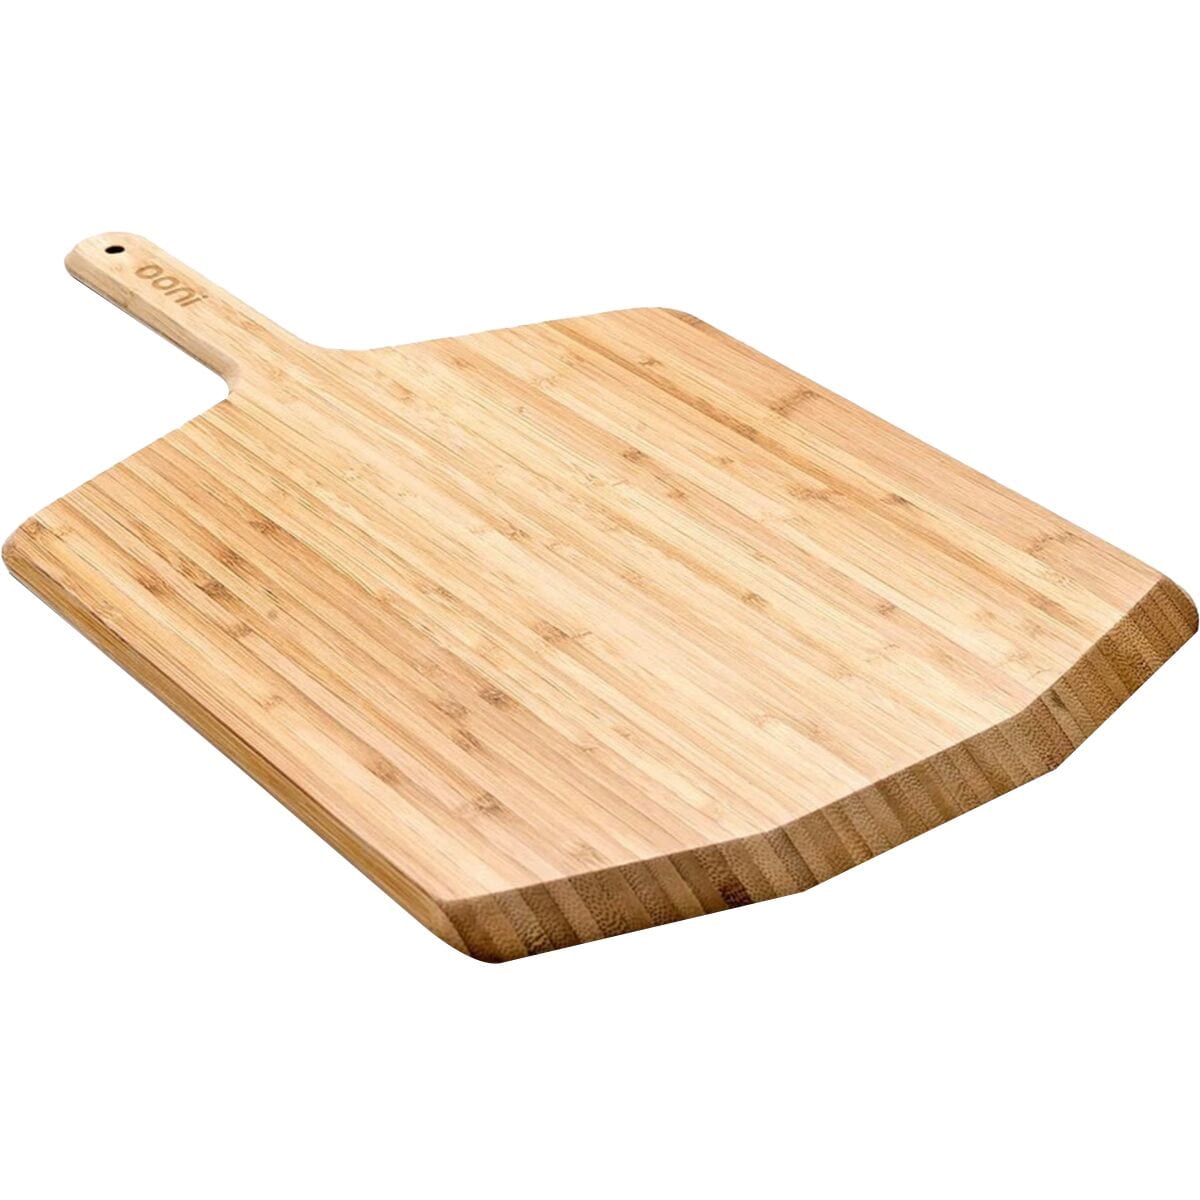  Ooni 12in Bamboo Pizza Peel & Serving Board - Hike & Camp